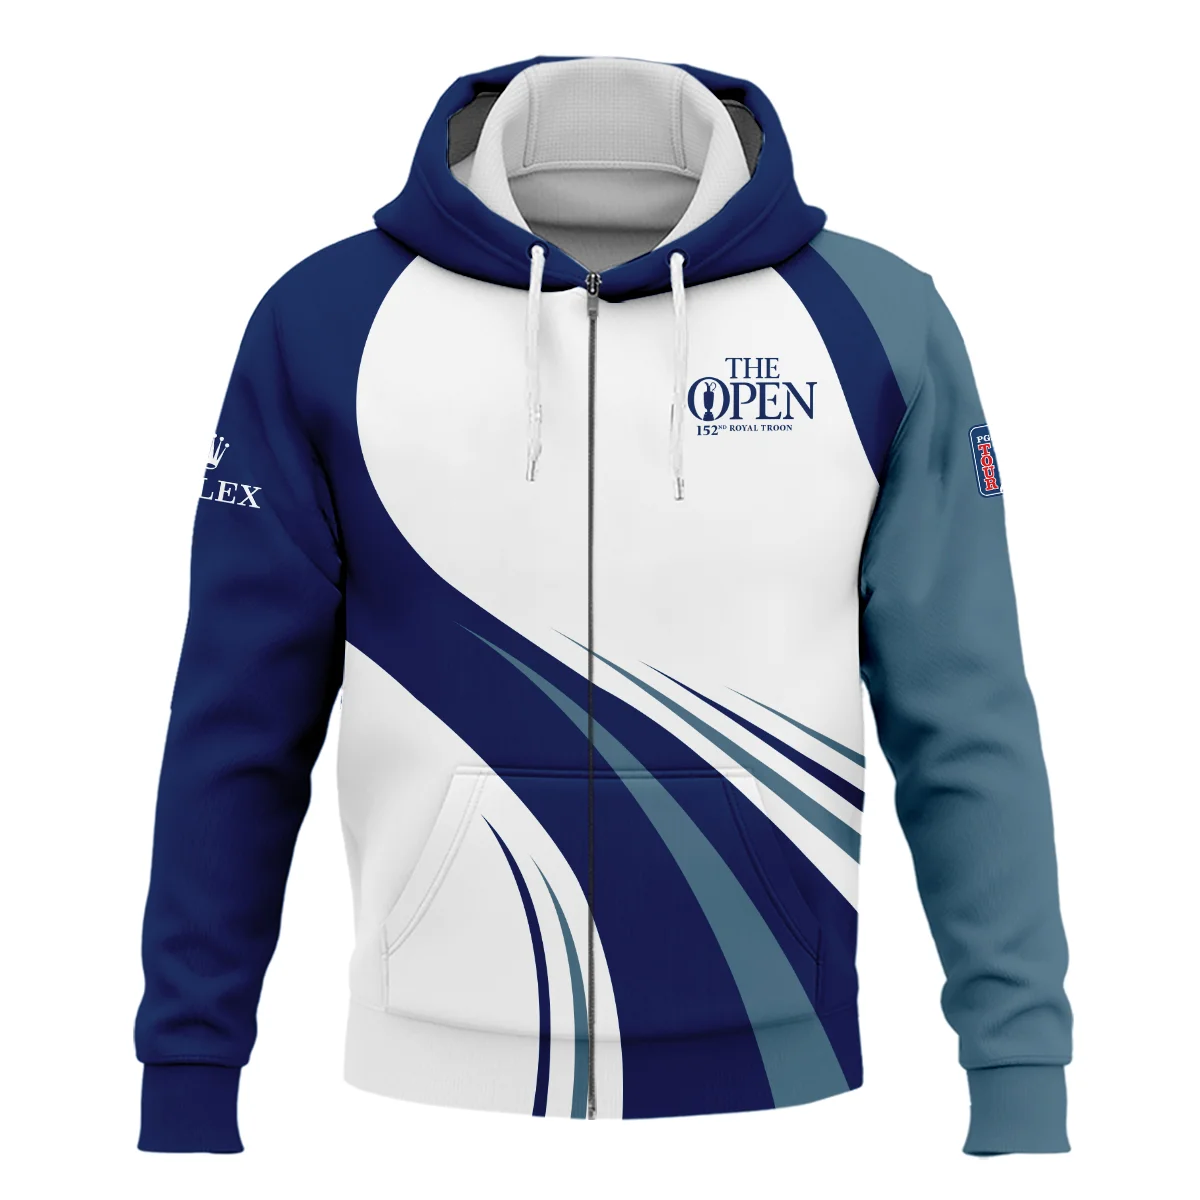 152nd Open Championship Rolex White Mostly Desaturated Dark Blue Hoodie Shirt All Over Prints HOTOP270624A02ROXHD